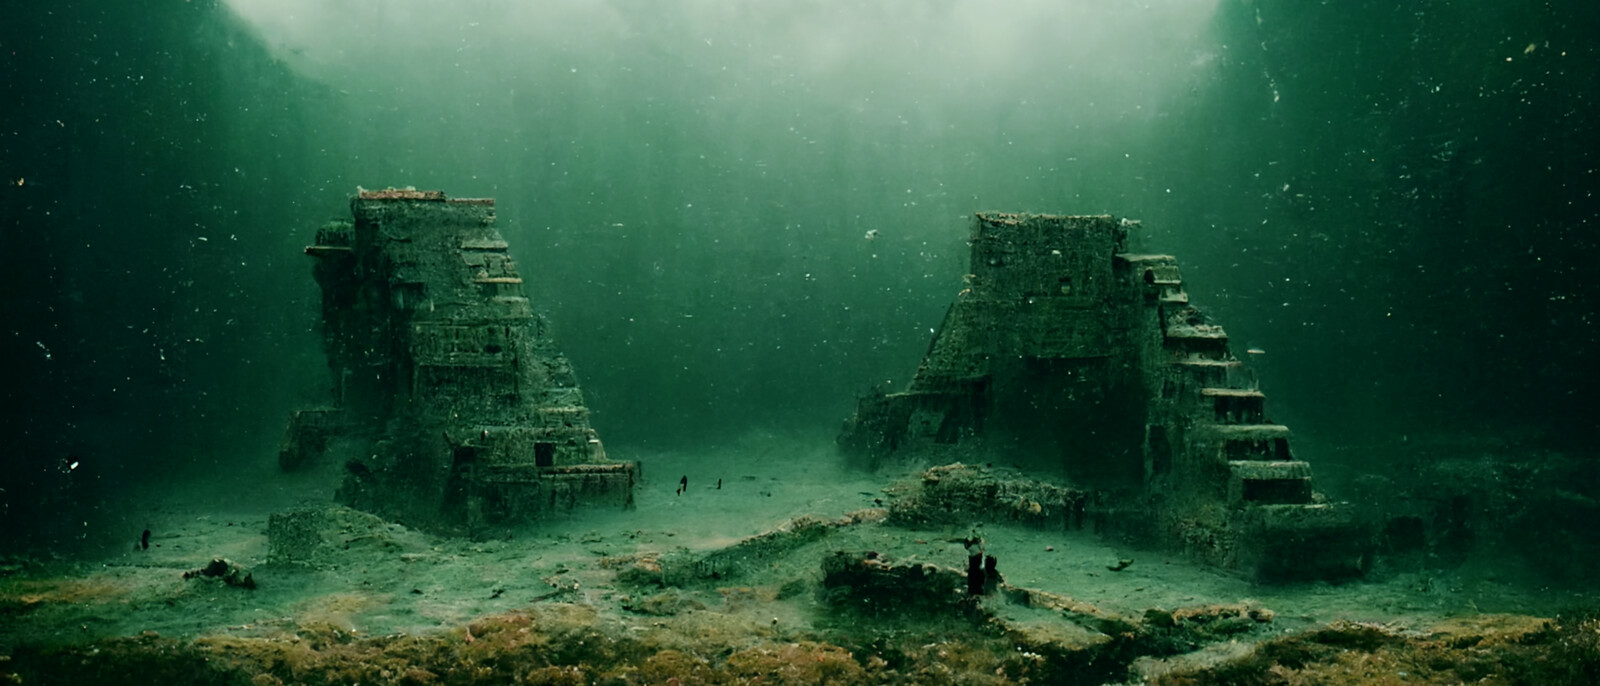 First ruins discovered inside the Dark Reef. They're not human in origin, but they contain human-like structures like doors and windows. They also appear to be land structures that were suddenly submerged. 